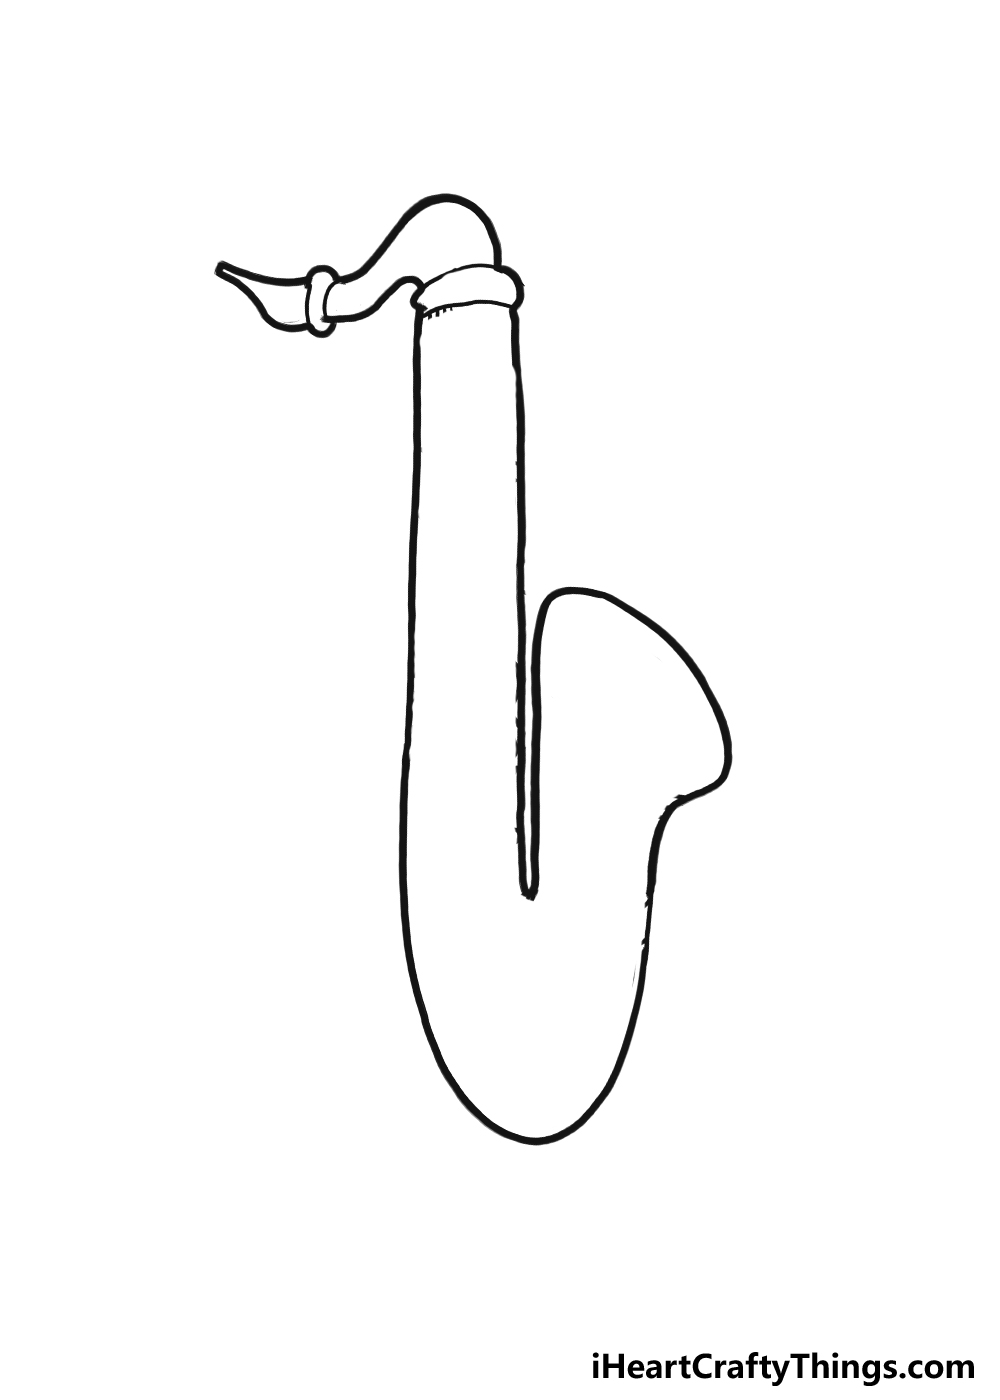 How to Draw A Saxophone step 3